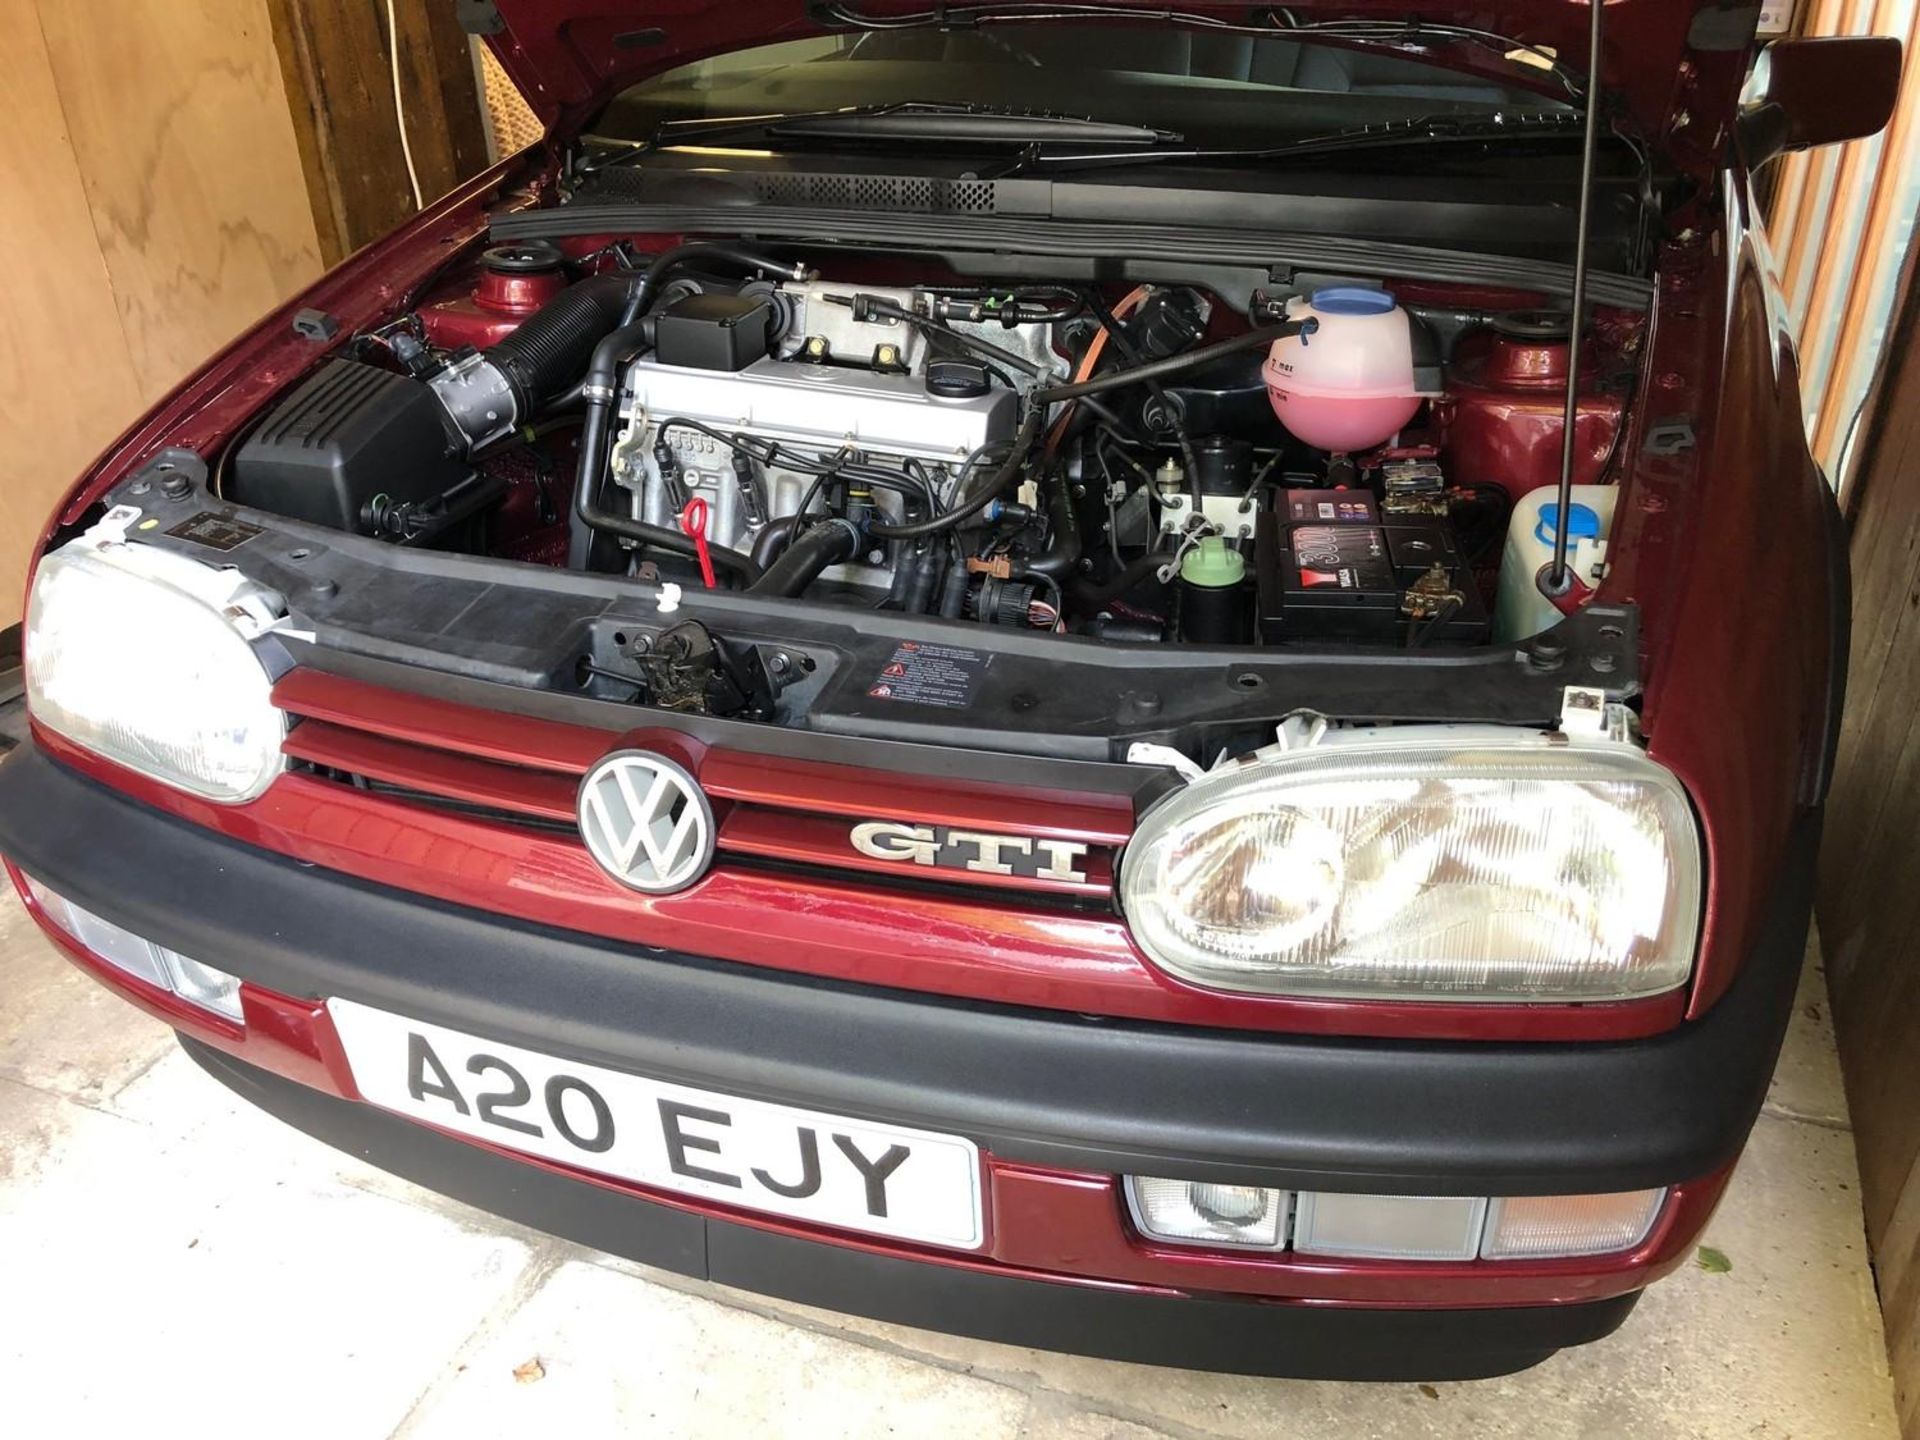 A 1996 VW Golf GTI Registration number A20 EJY Chassis number WVWZZZ1HZVW185360 Engine number - Image 30 of 55